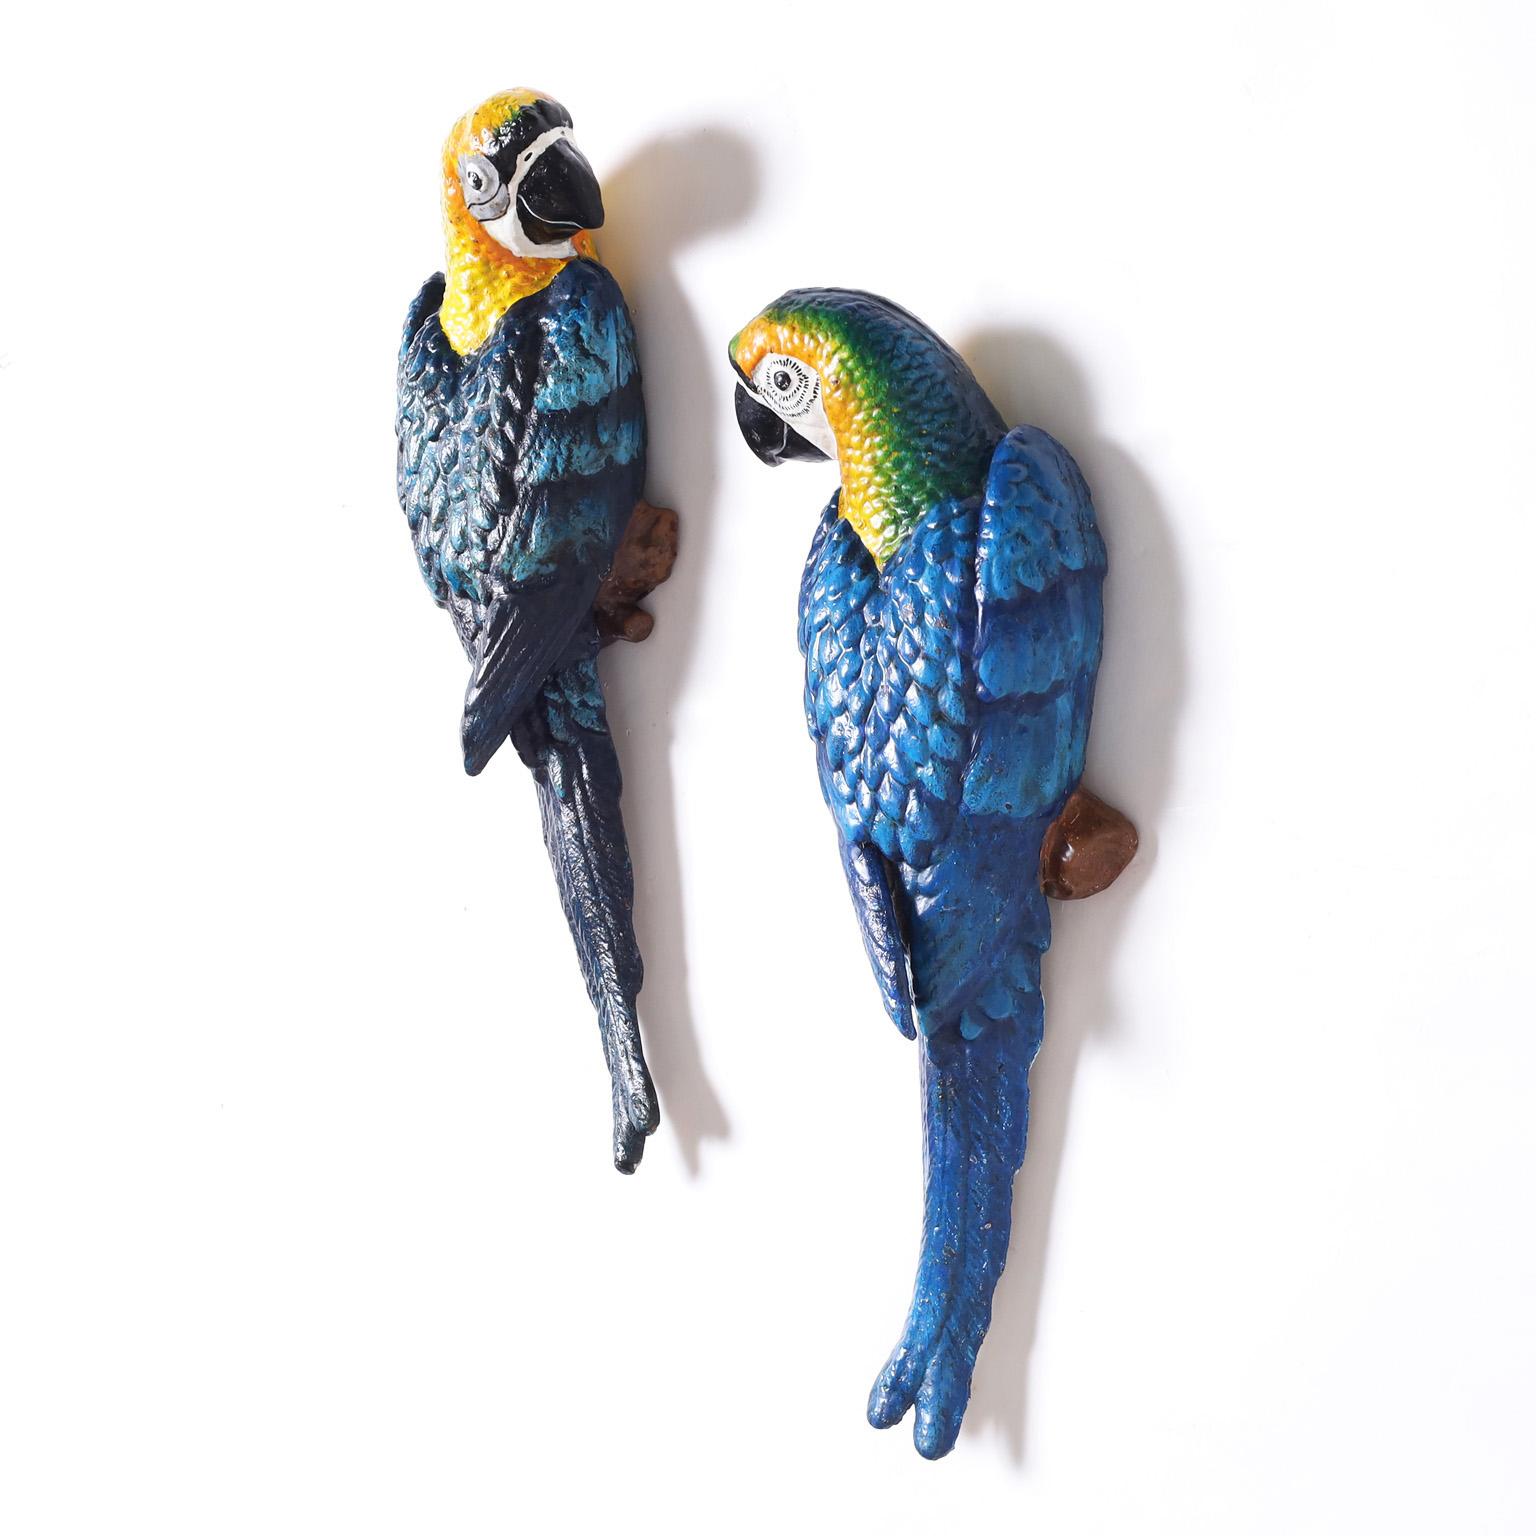 Striking pair of vintage lifesize wall hanging parrots crafted in cast iron and painted in tropical colors now slightly oxidized. 